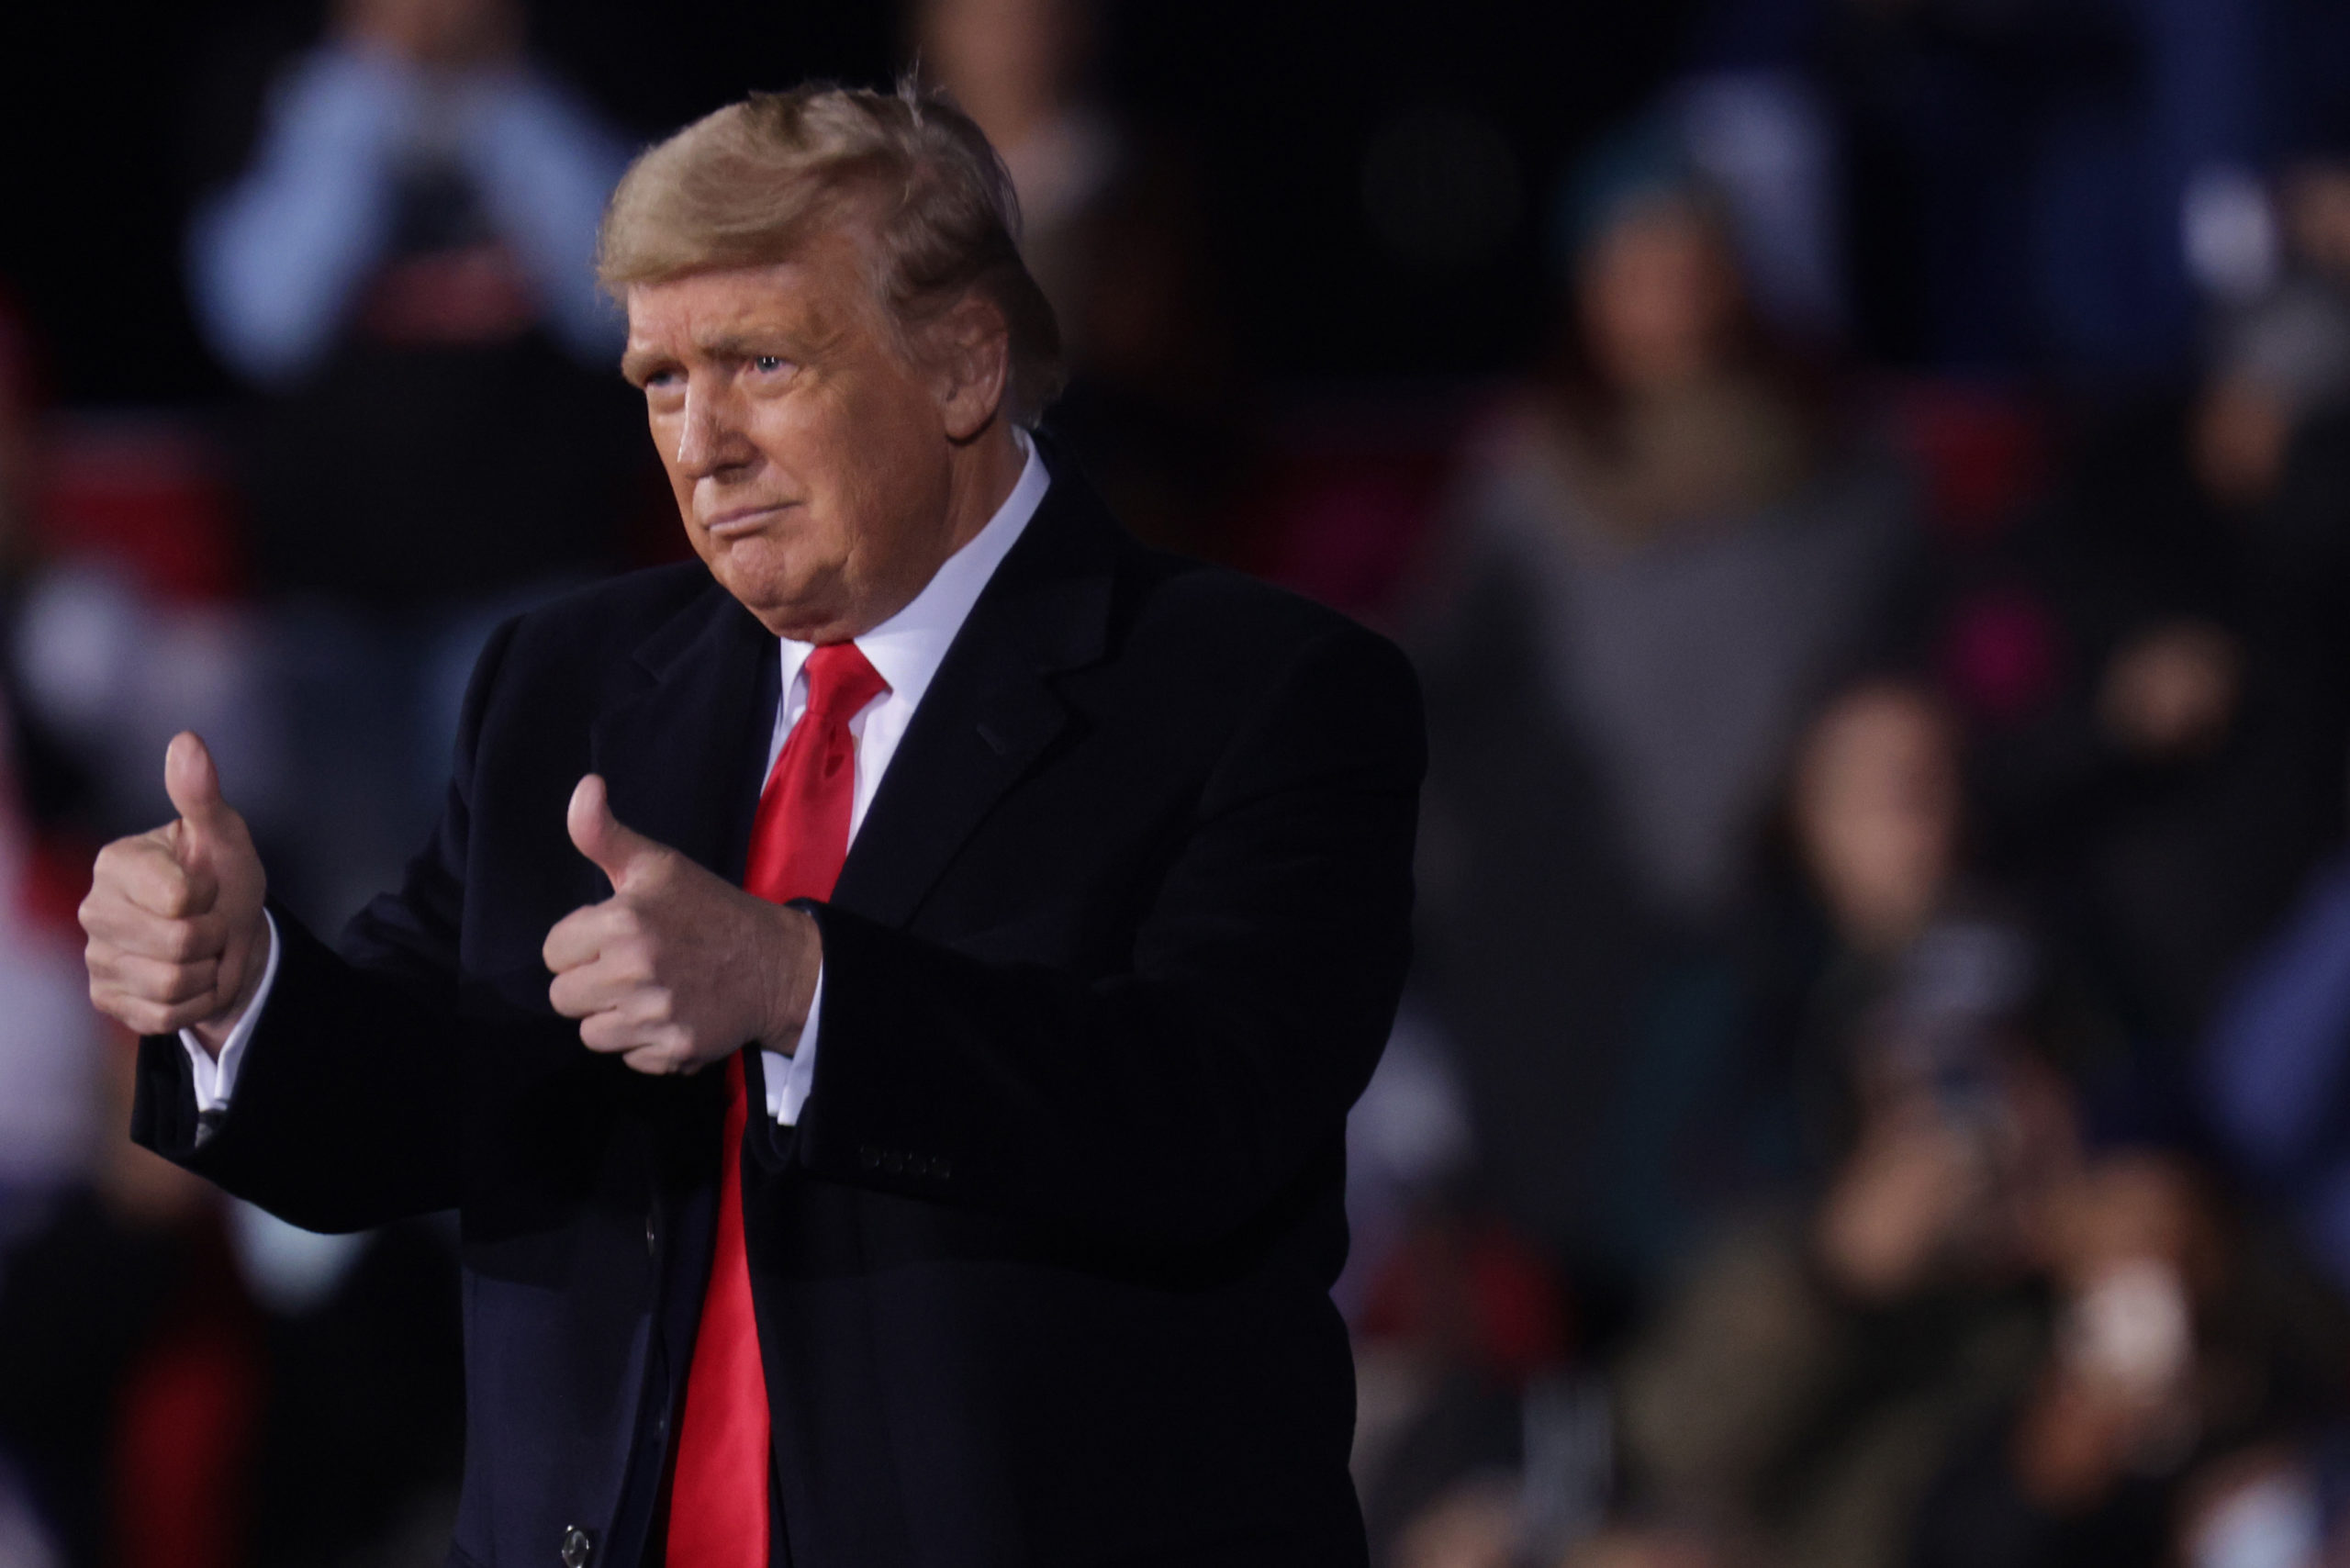 DALTON, GEORGIA - JANUARY 04: U.S. President Donald Trump holds two thumbs up during a Republican National Committee Victory Rally at Dalton Regional Airport January 4, 2021 in Dalton, Georgia. President Trump campaigned for the two incumbents, Sen. David Perdue (R-GA) and Sen. Kelly Loeffler (R-GA), for tomorrow’s runoff elections in Georgia. (Photo by Alex Wong/Getty Images)